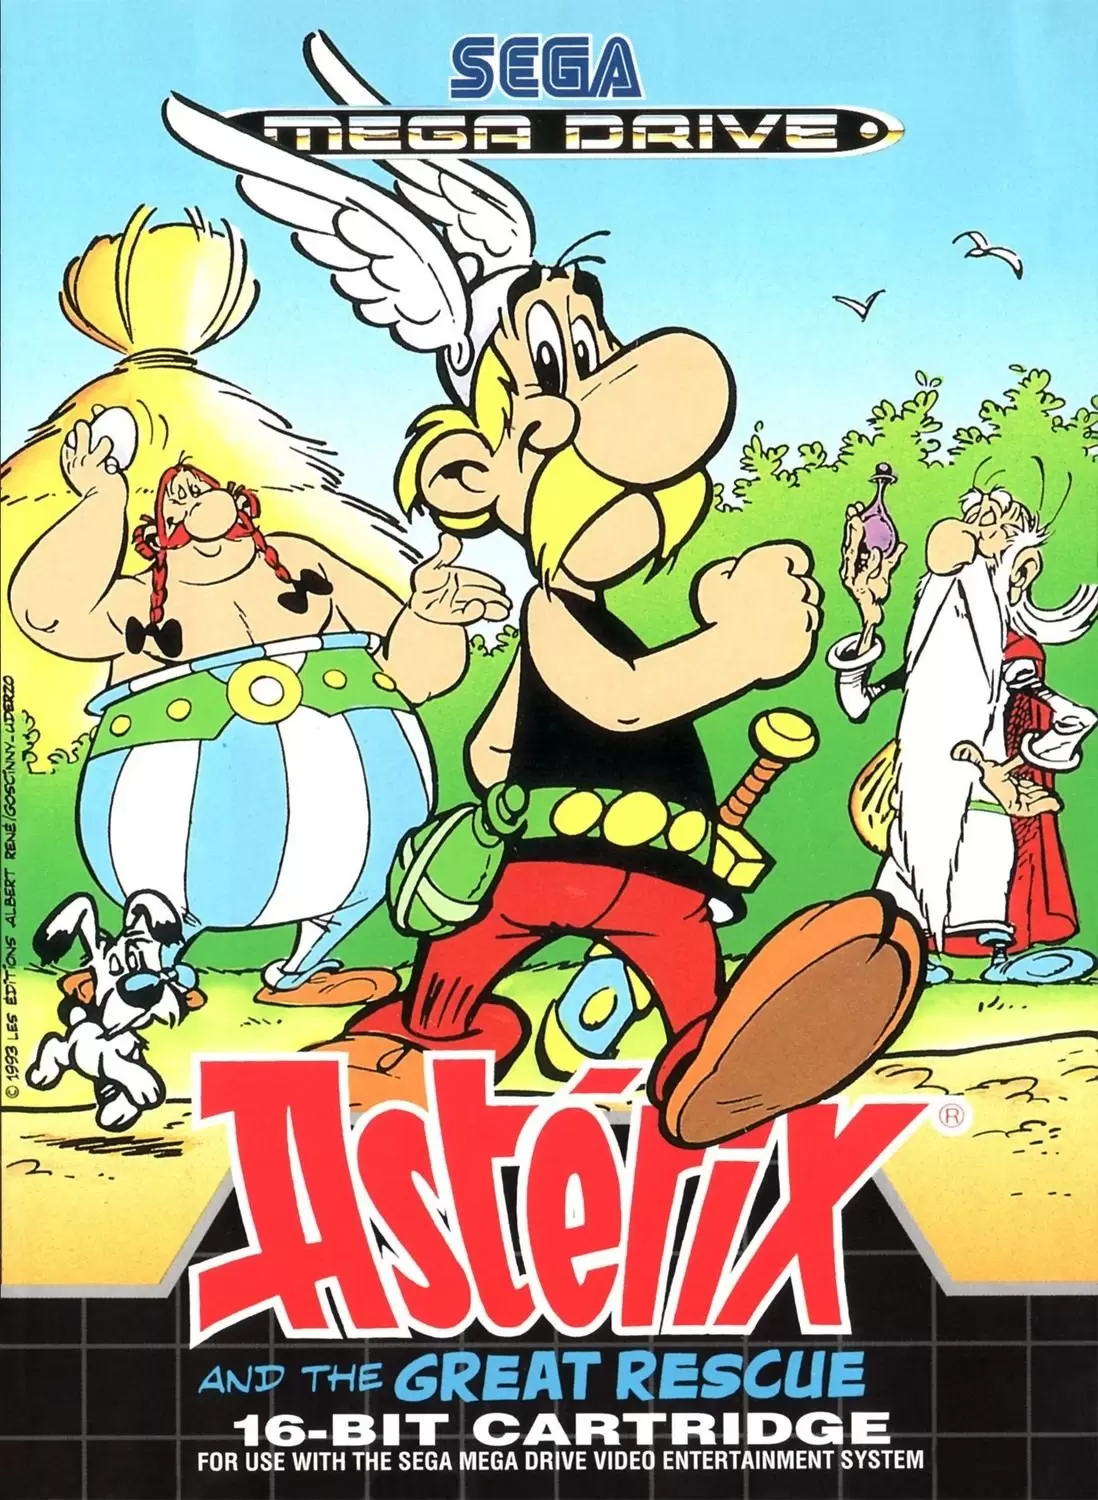 Sega Genesis Games - Asterix and the Great Rescue